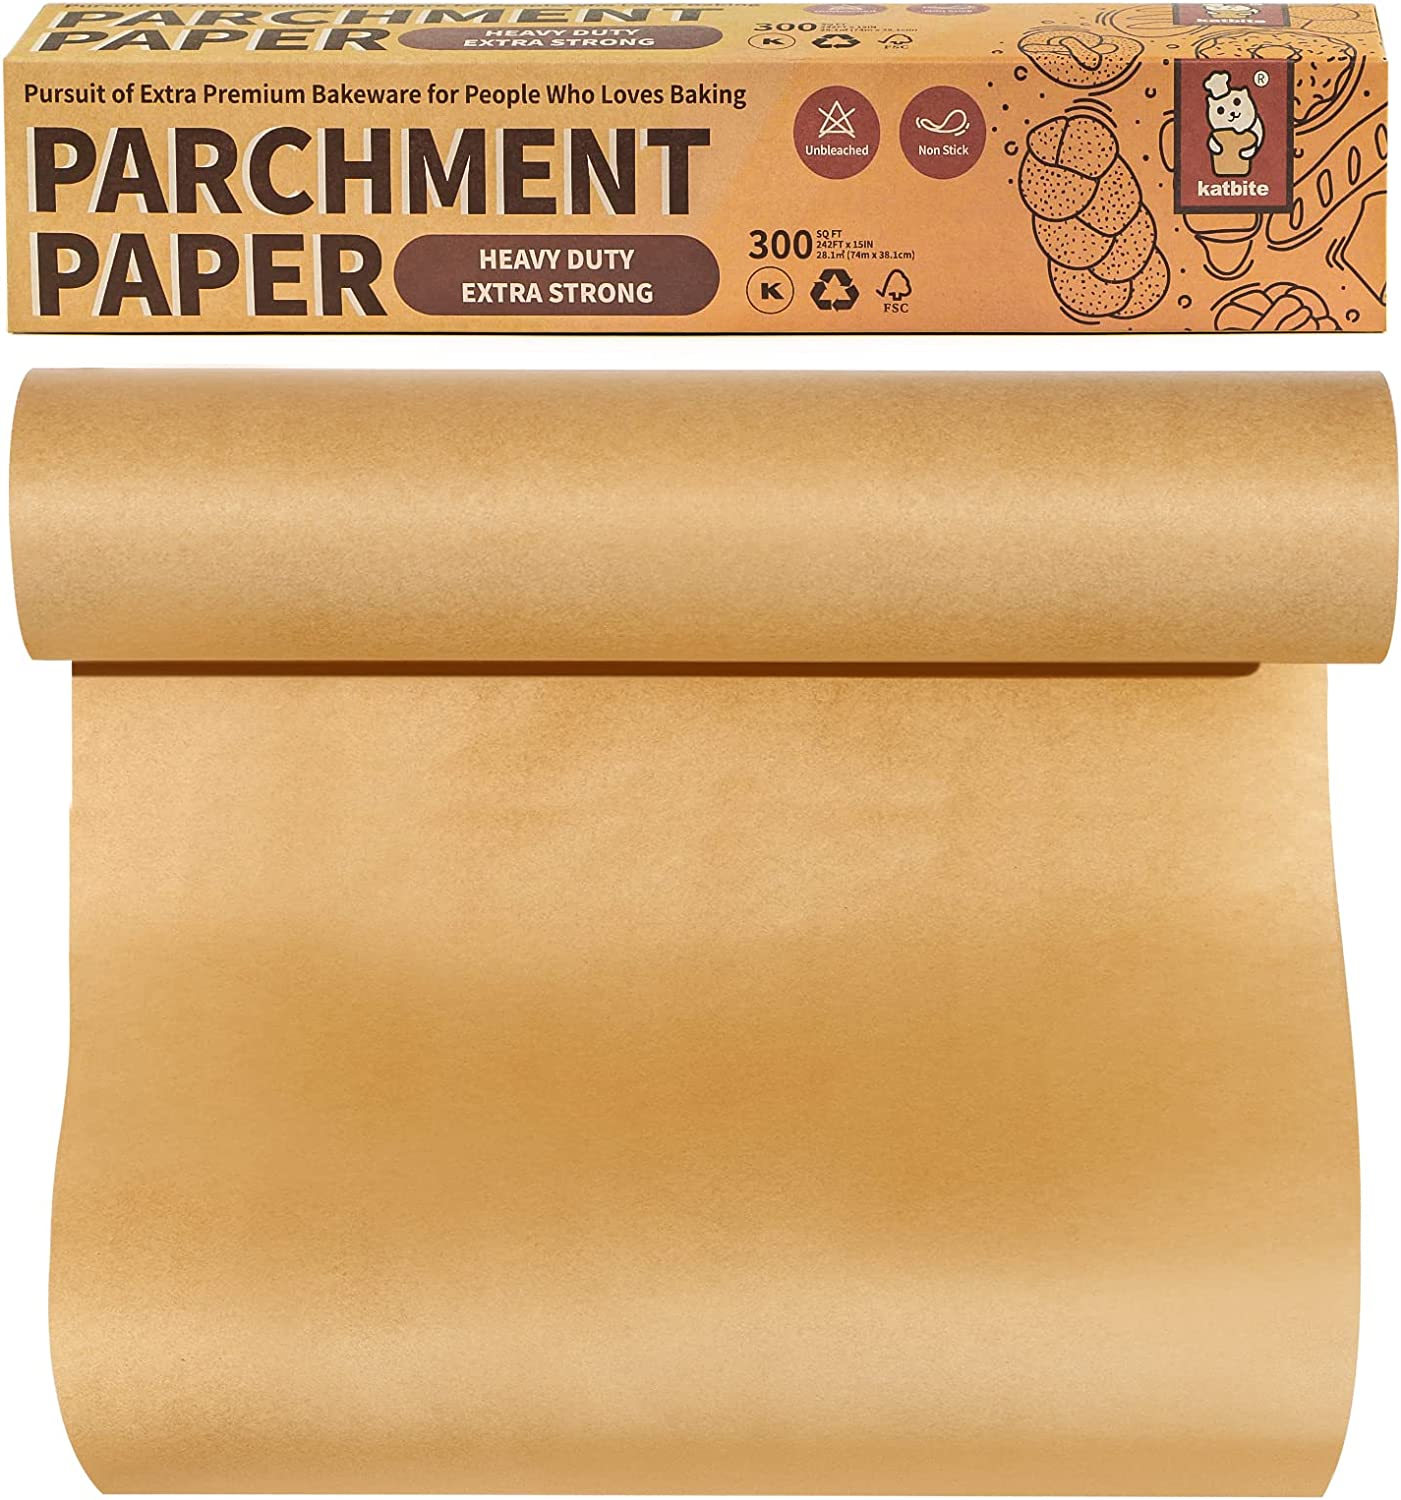 Katbite Parchment Paper Roll for Baking, 15 in x 210 ft 260 Sq.Ft